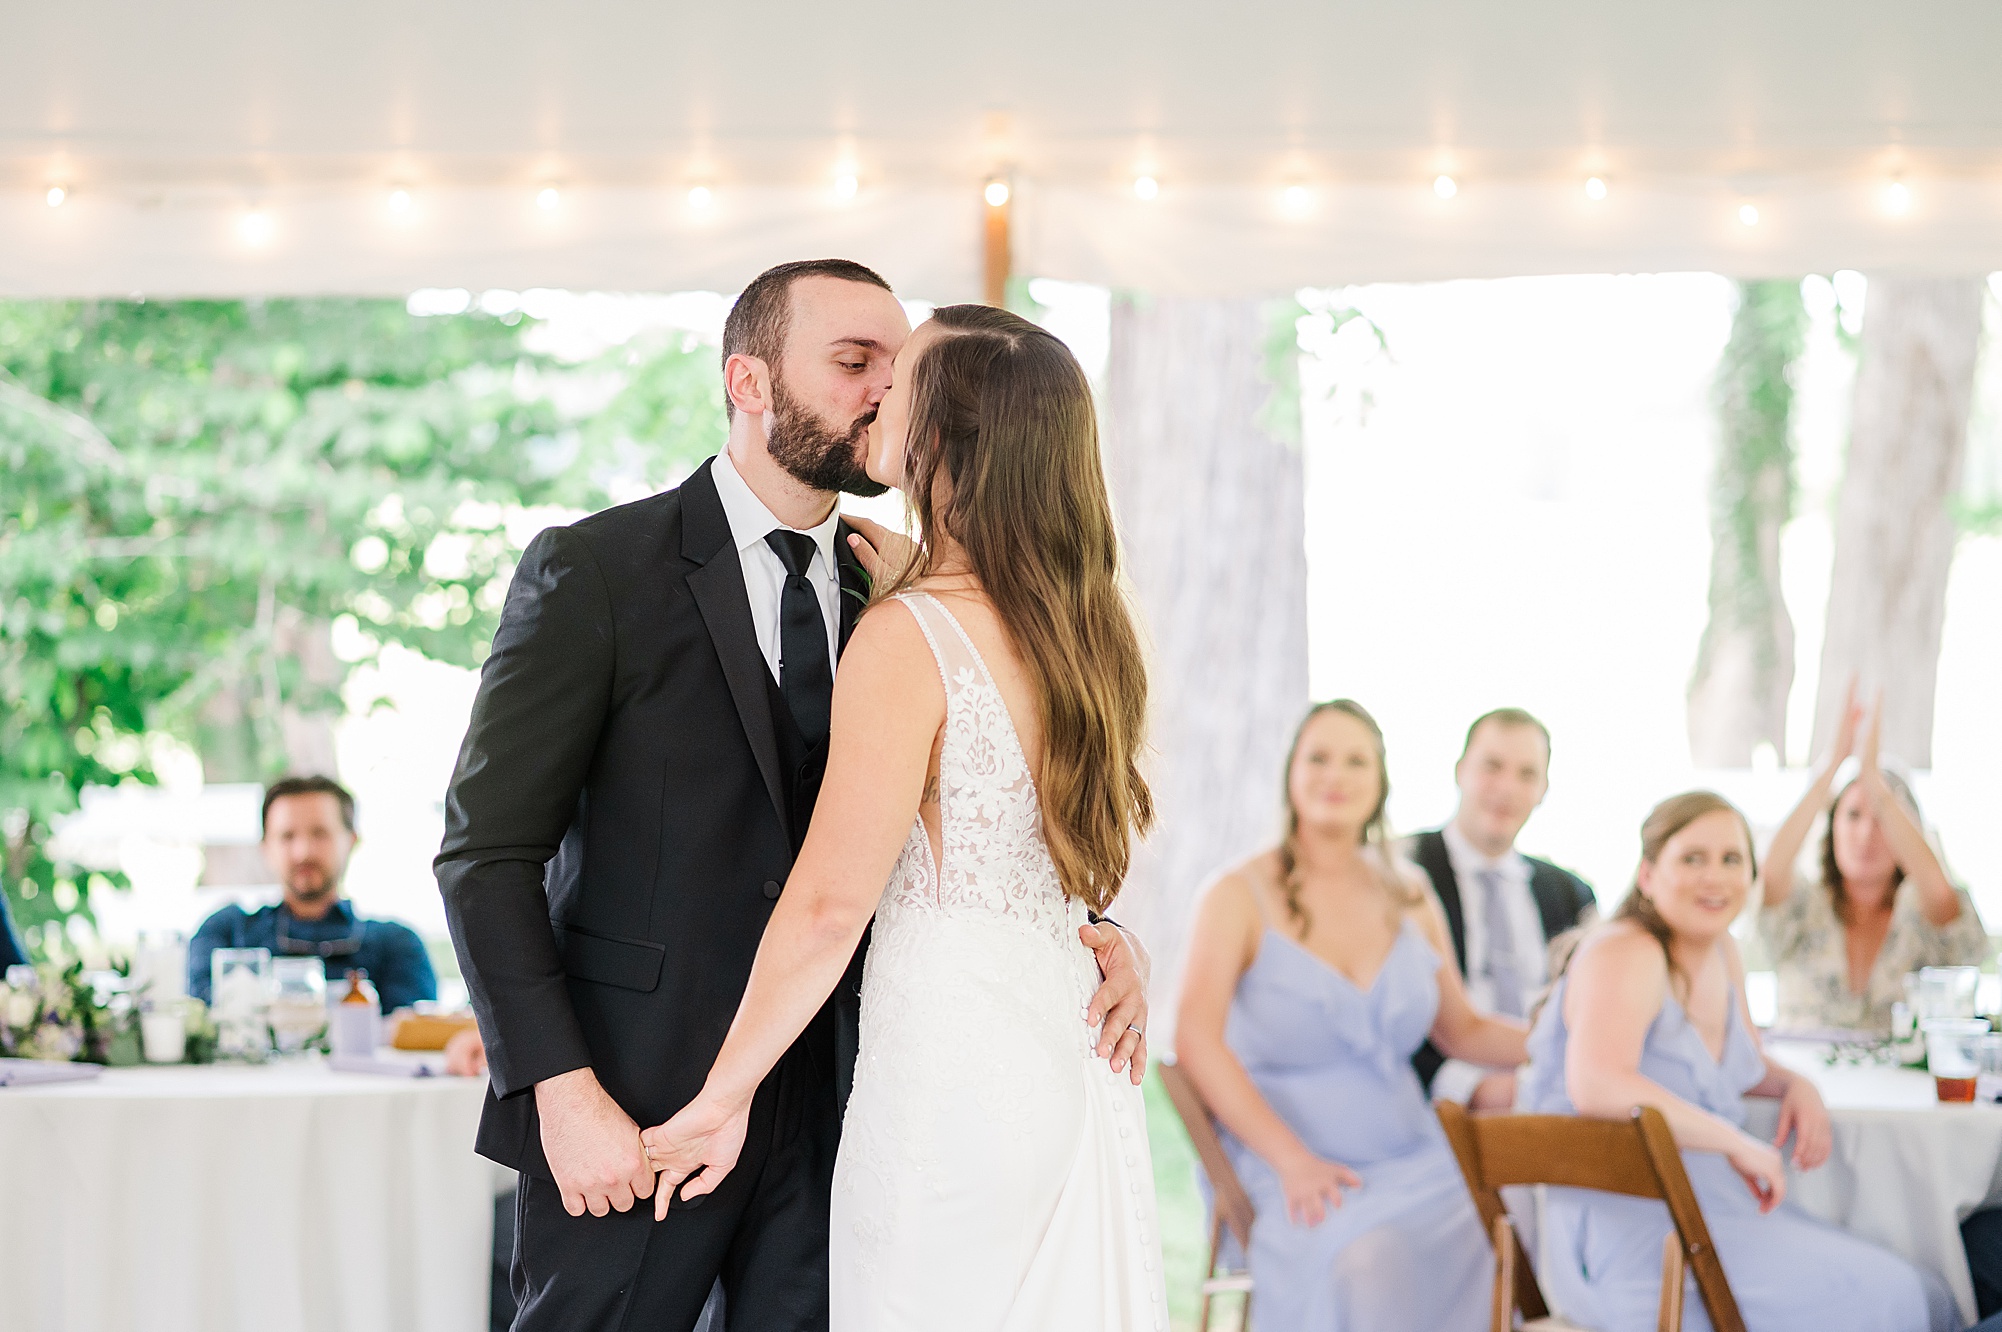 Bride and Groom First Dance at Reception Wedding at Historic Tuckahoe